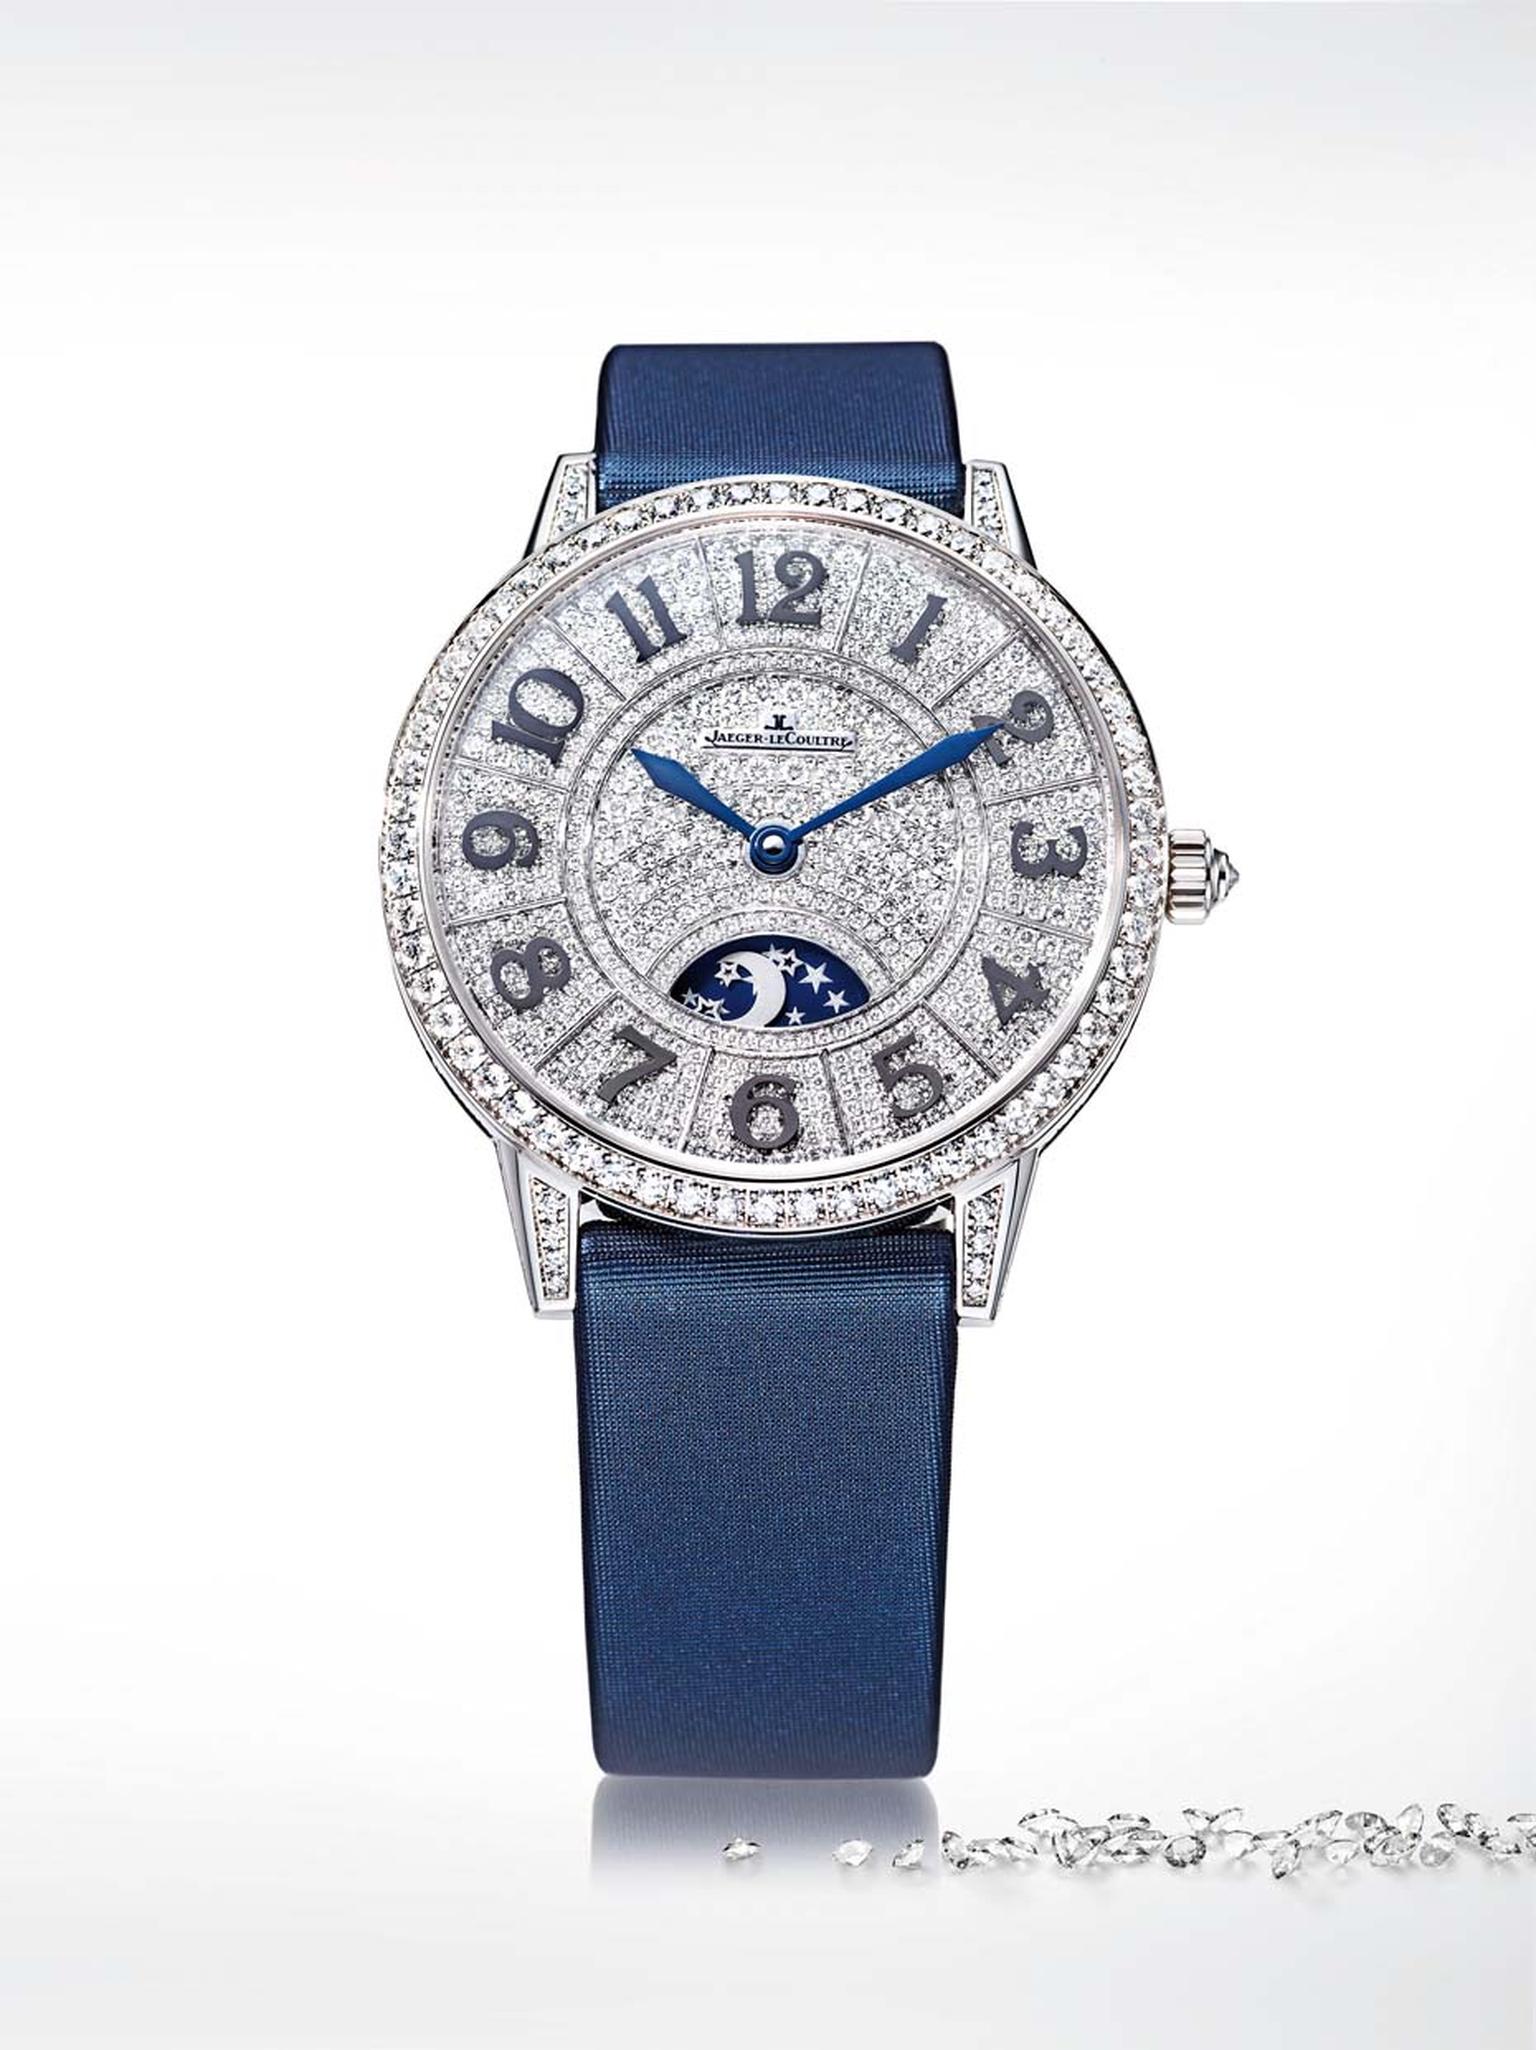 Jaeger-LeCoultre Rendez-Vous Night and Day watch with a